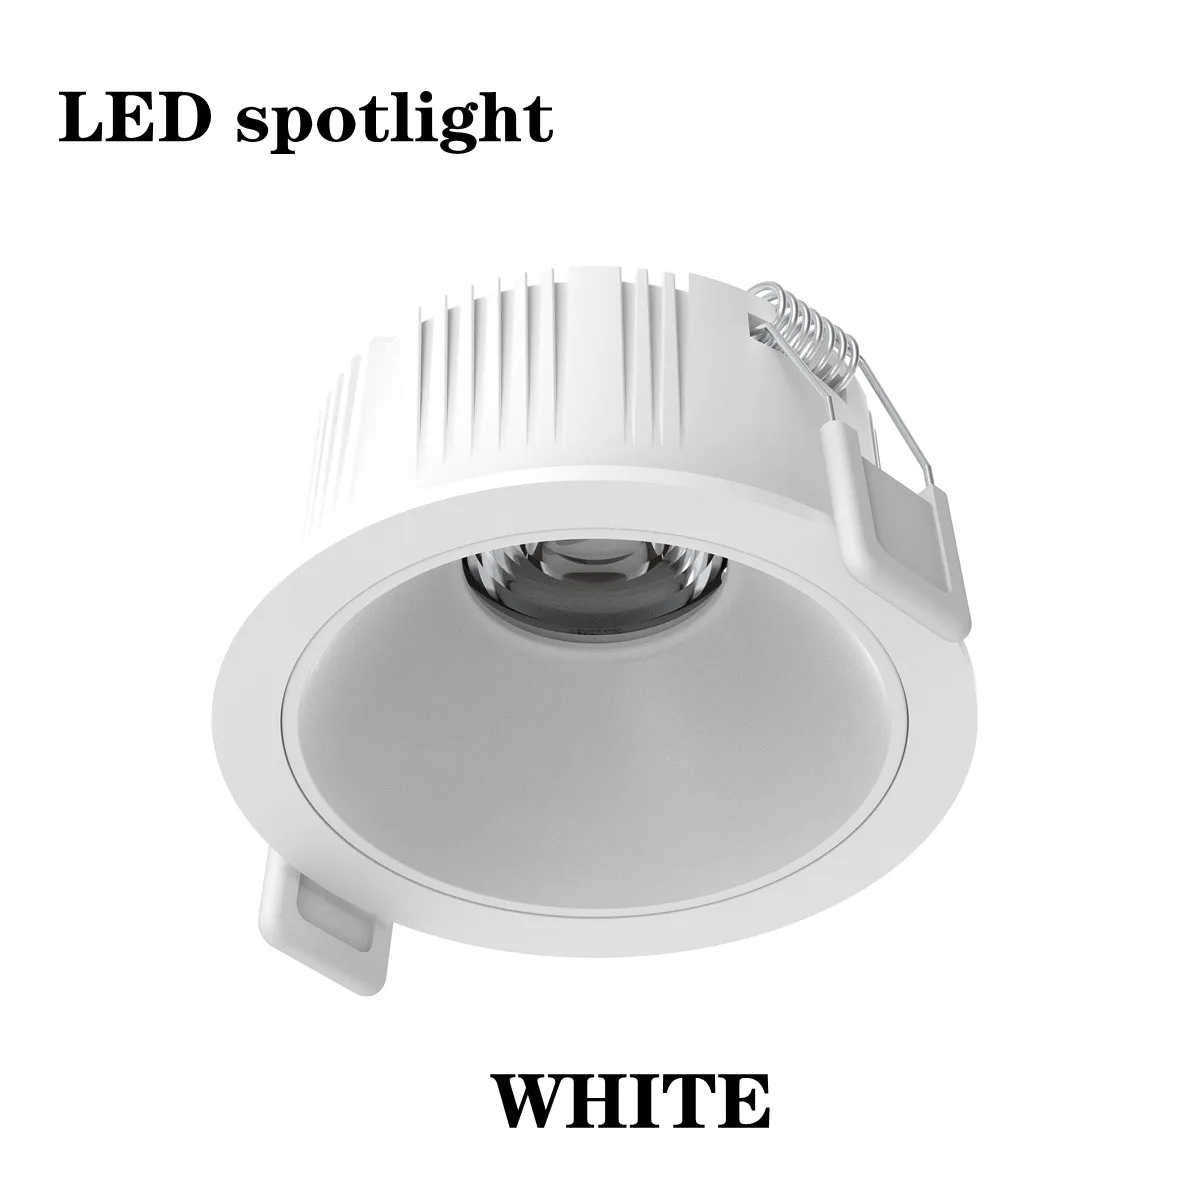 Dimmable led downlight light cob cree ceiling spot light 5w 7w 9w 12w 15w 18w ceiling thumb200